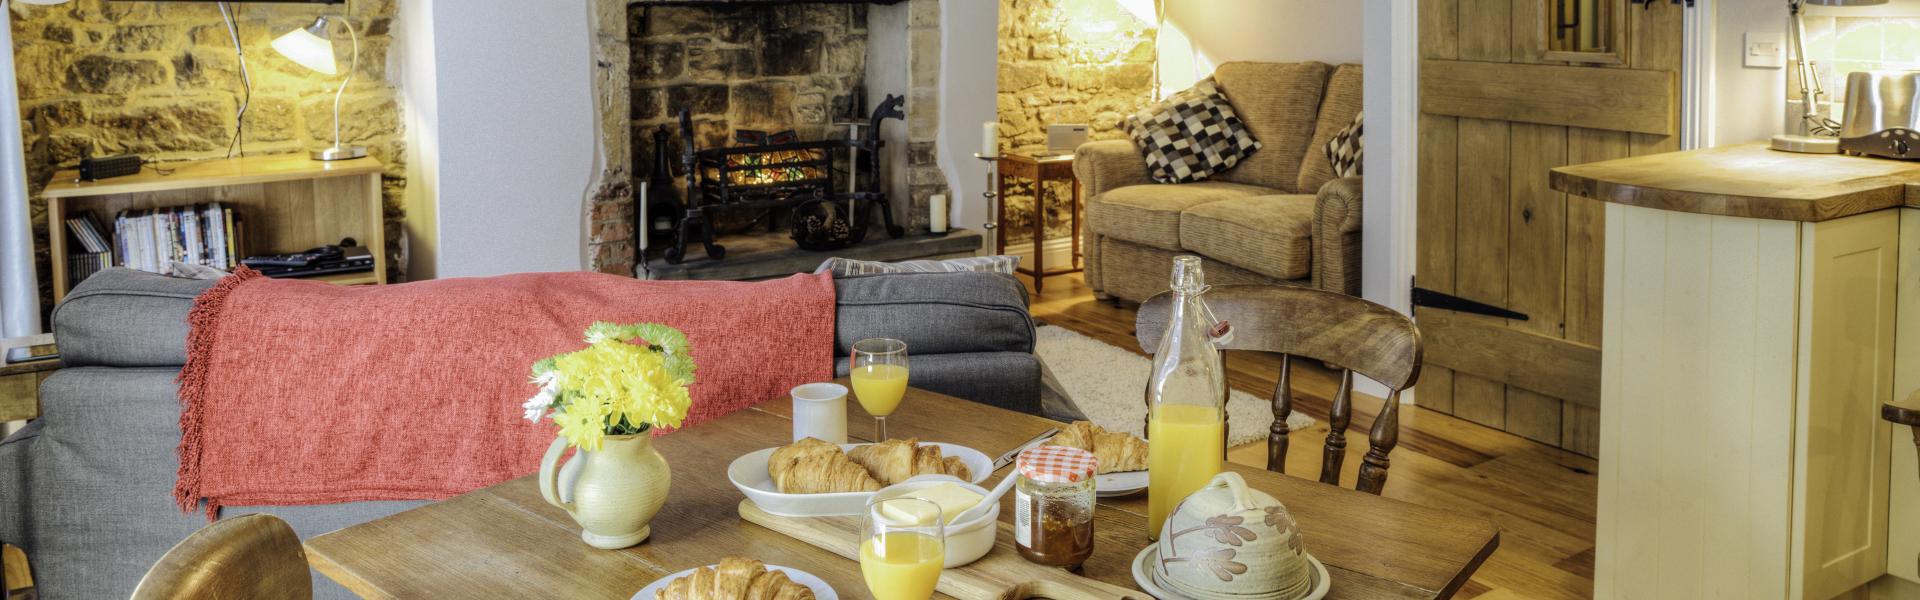 Bed and Breakfast Accommodation in Kent - HomeToGo